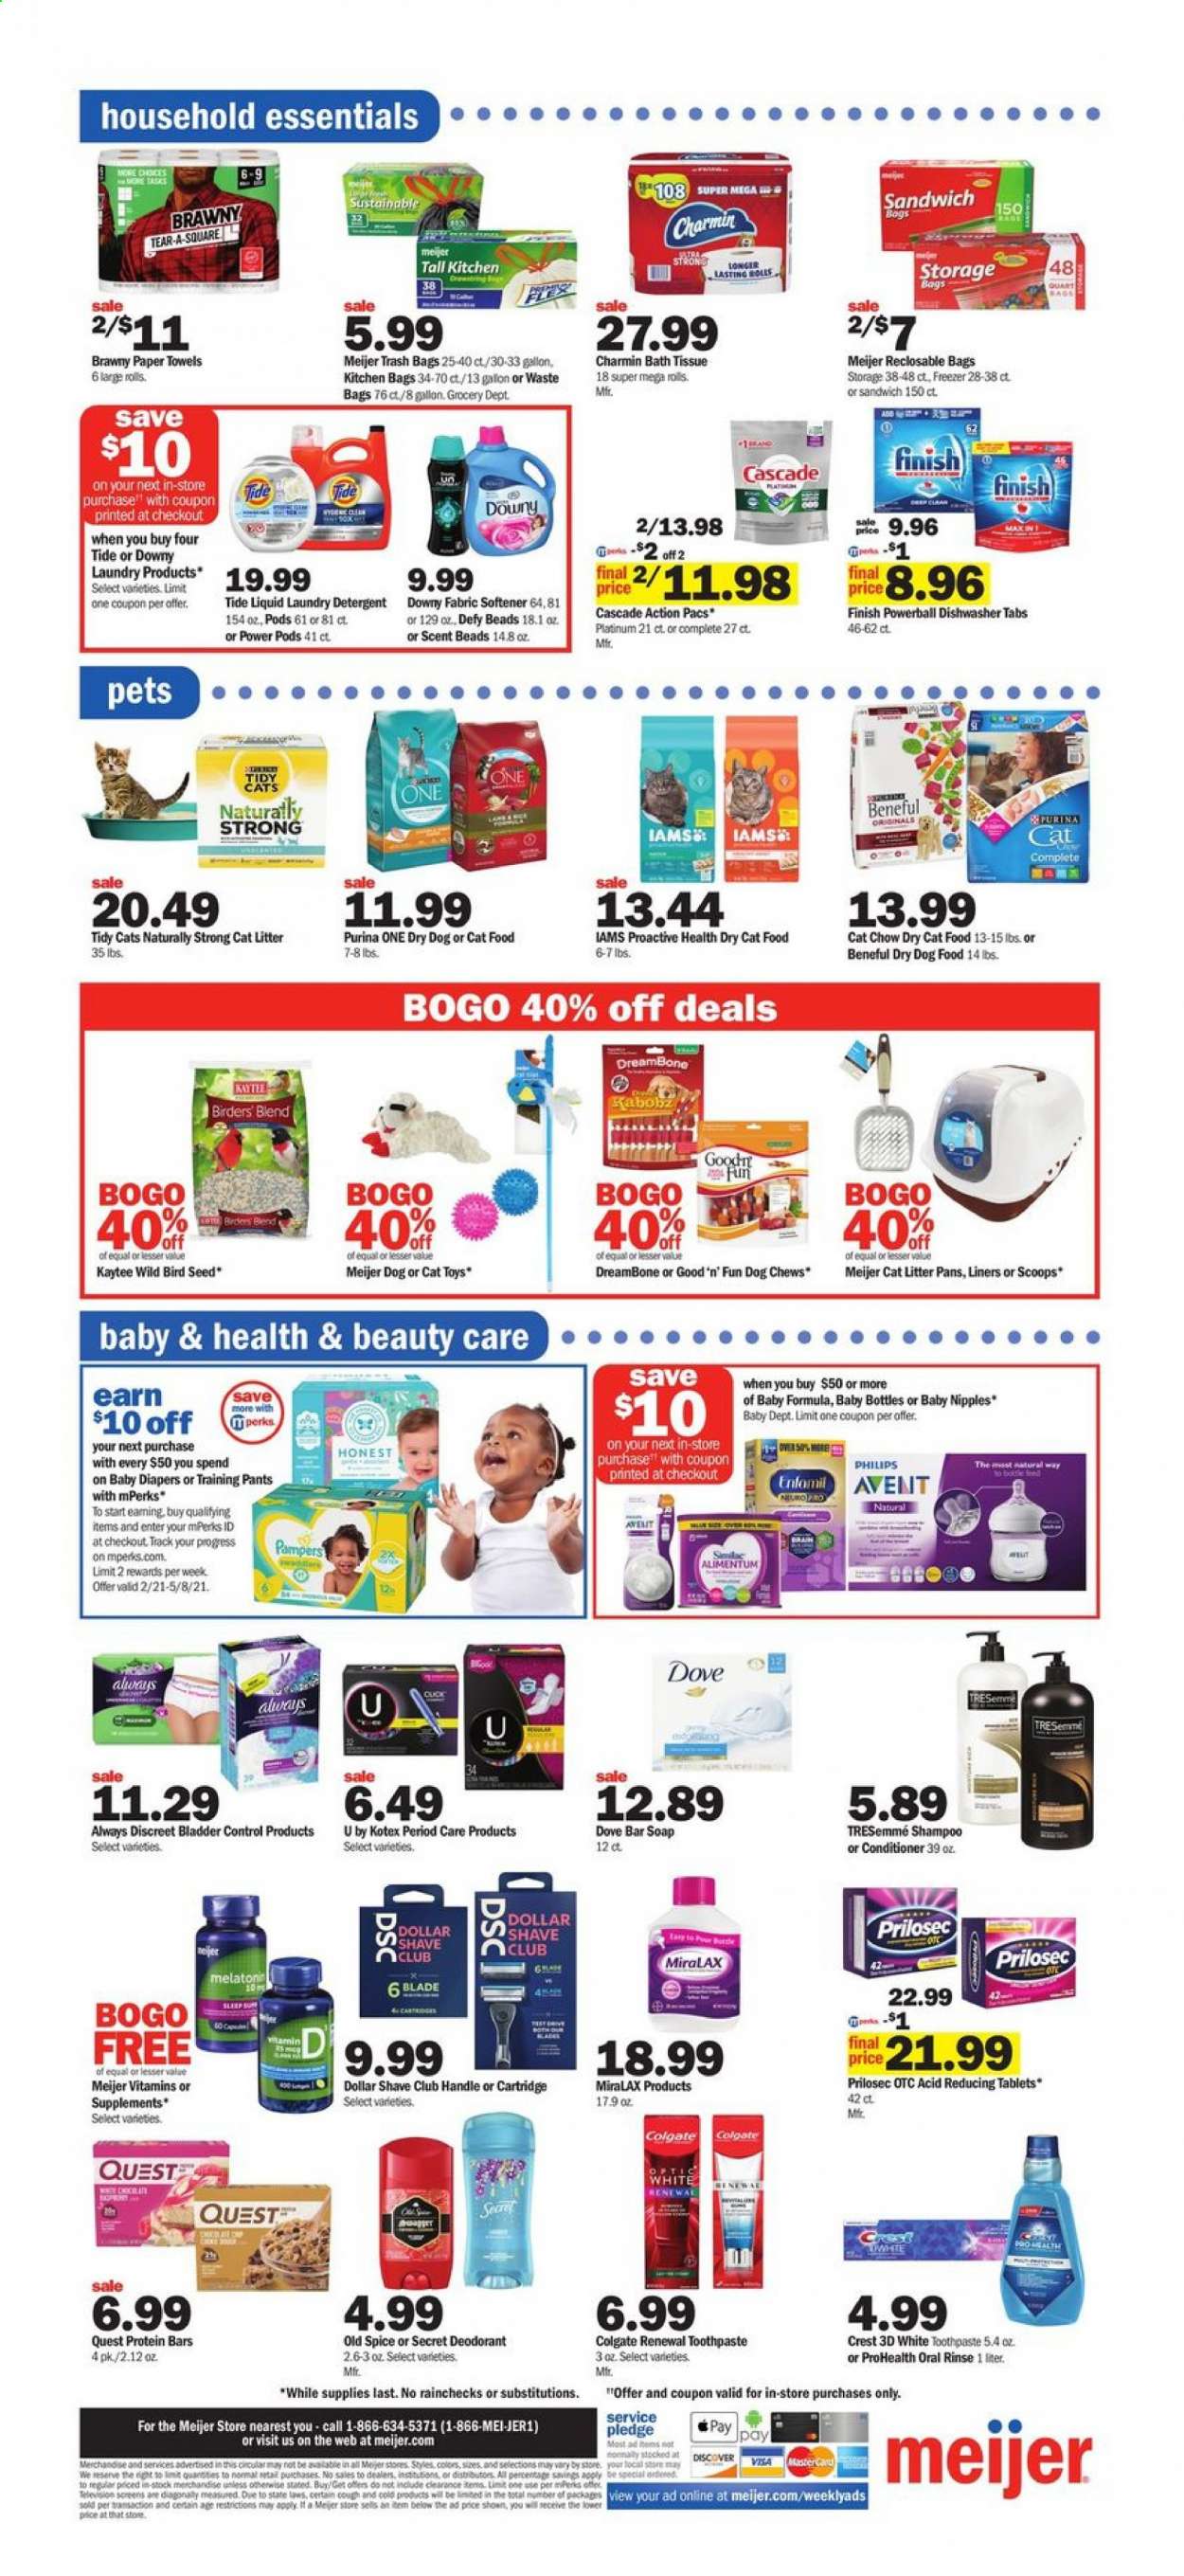 thumbnail - Meijer Flyer - 04/04/2021 - 04/10/2021 - Sales products - sandwich, protein bar, rice, Pampers, baby pants, bath tissue, kitchen towels, paper towels, Charmin, detergent, Pledge, Cascade, Tide, fabric softener, laundry detergent, Finish Powerball, Dove, Old Spice, soap bar, soap, Colgate, toothpaste, Crest, Always Discreet, Kotex, Dollar Shave Club, conditioner, TRESemmé, anti-perspirant, deodorant, trash bags, cat litter, cat toy, Kaytee, animal food, bird food, cat food, dog food, Purina, Good 'n' Fun, dry dog food, dog chews, dry cat food, Iams, Philips, cartridge, pants, bag, Melatonin, MiraLAX. Page 10.